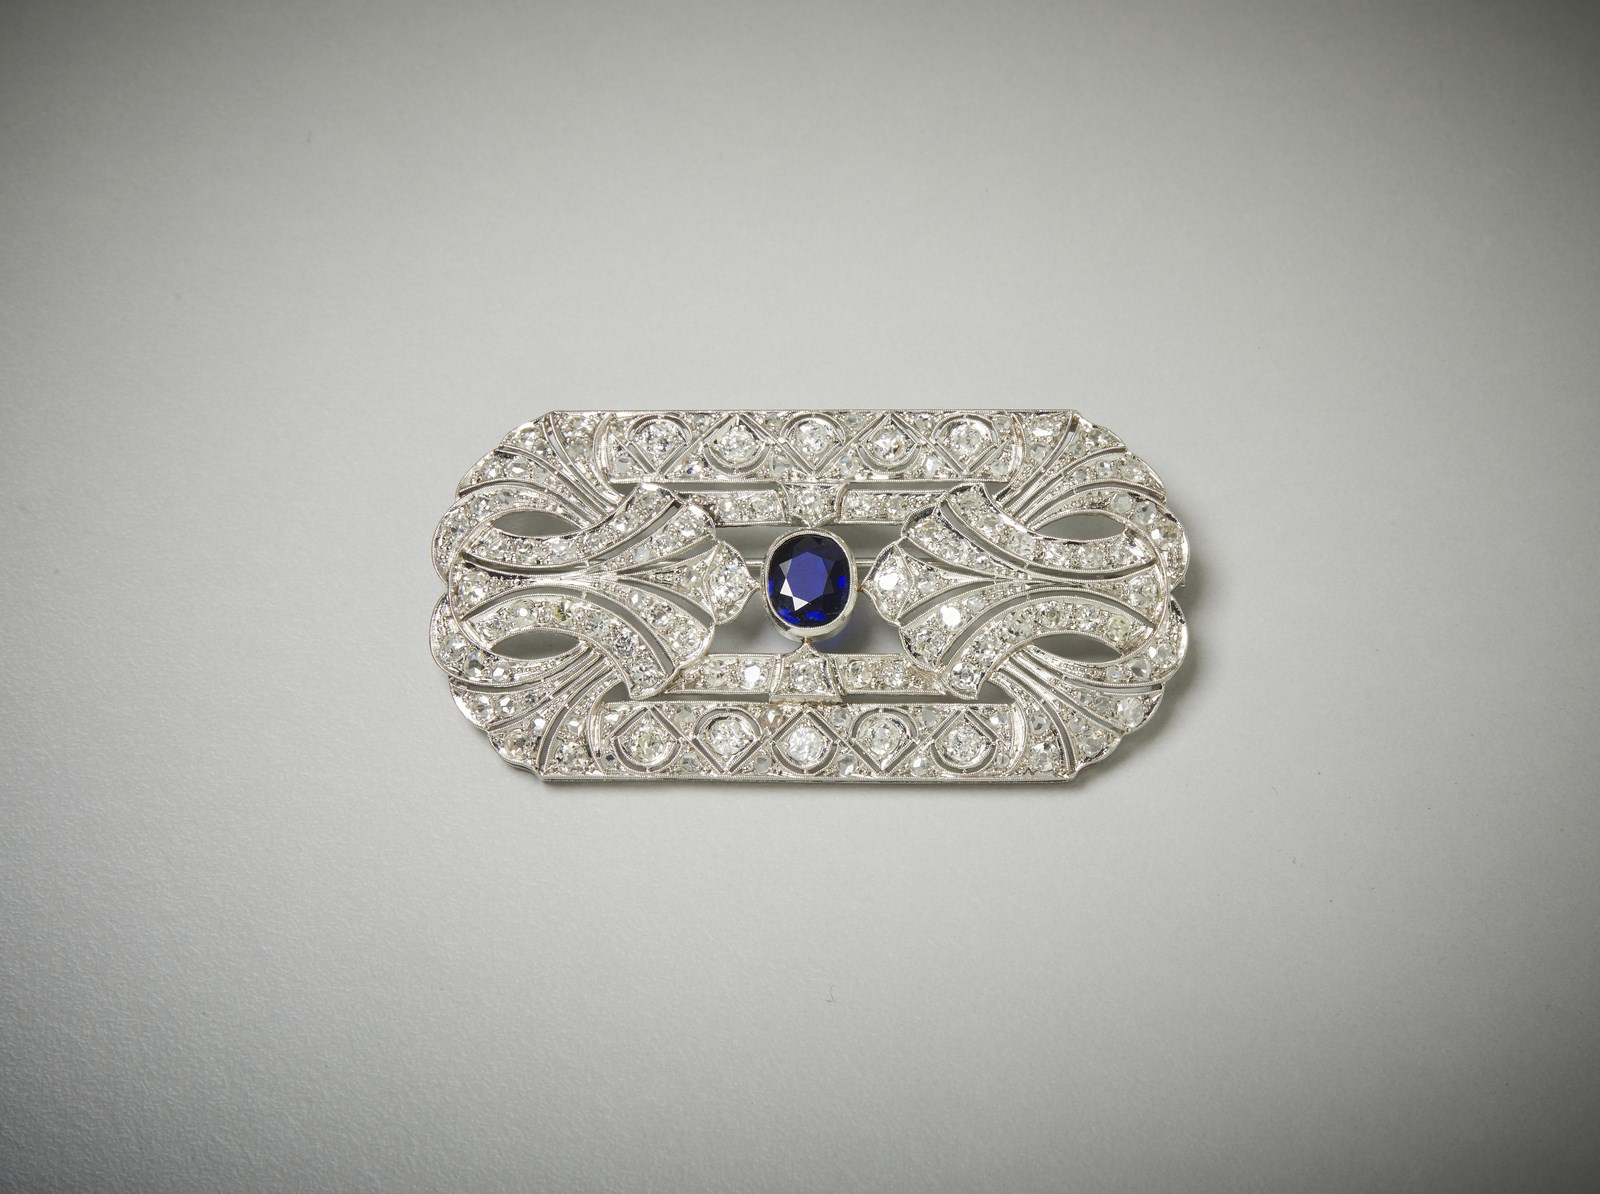 Brooch with old cut diamonds and dark blue sapphire. (. )